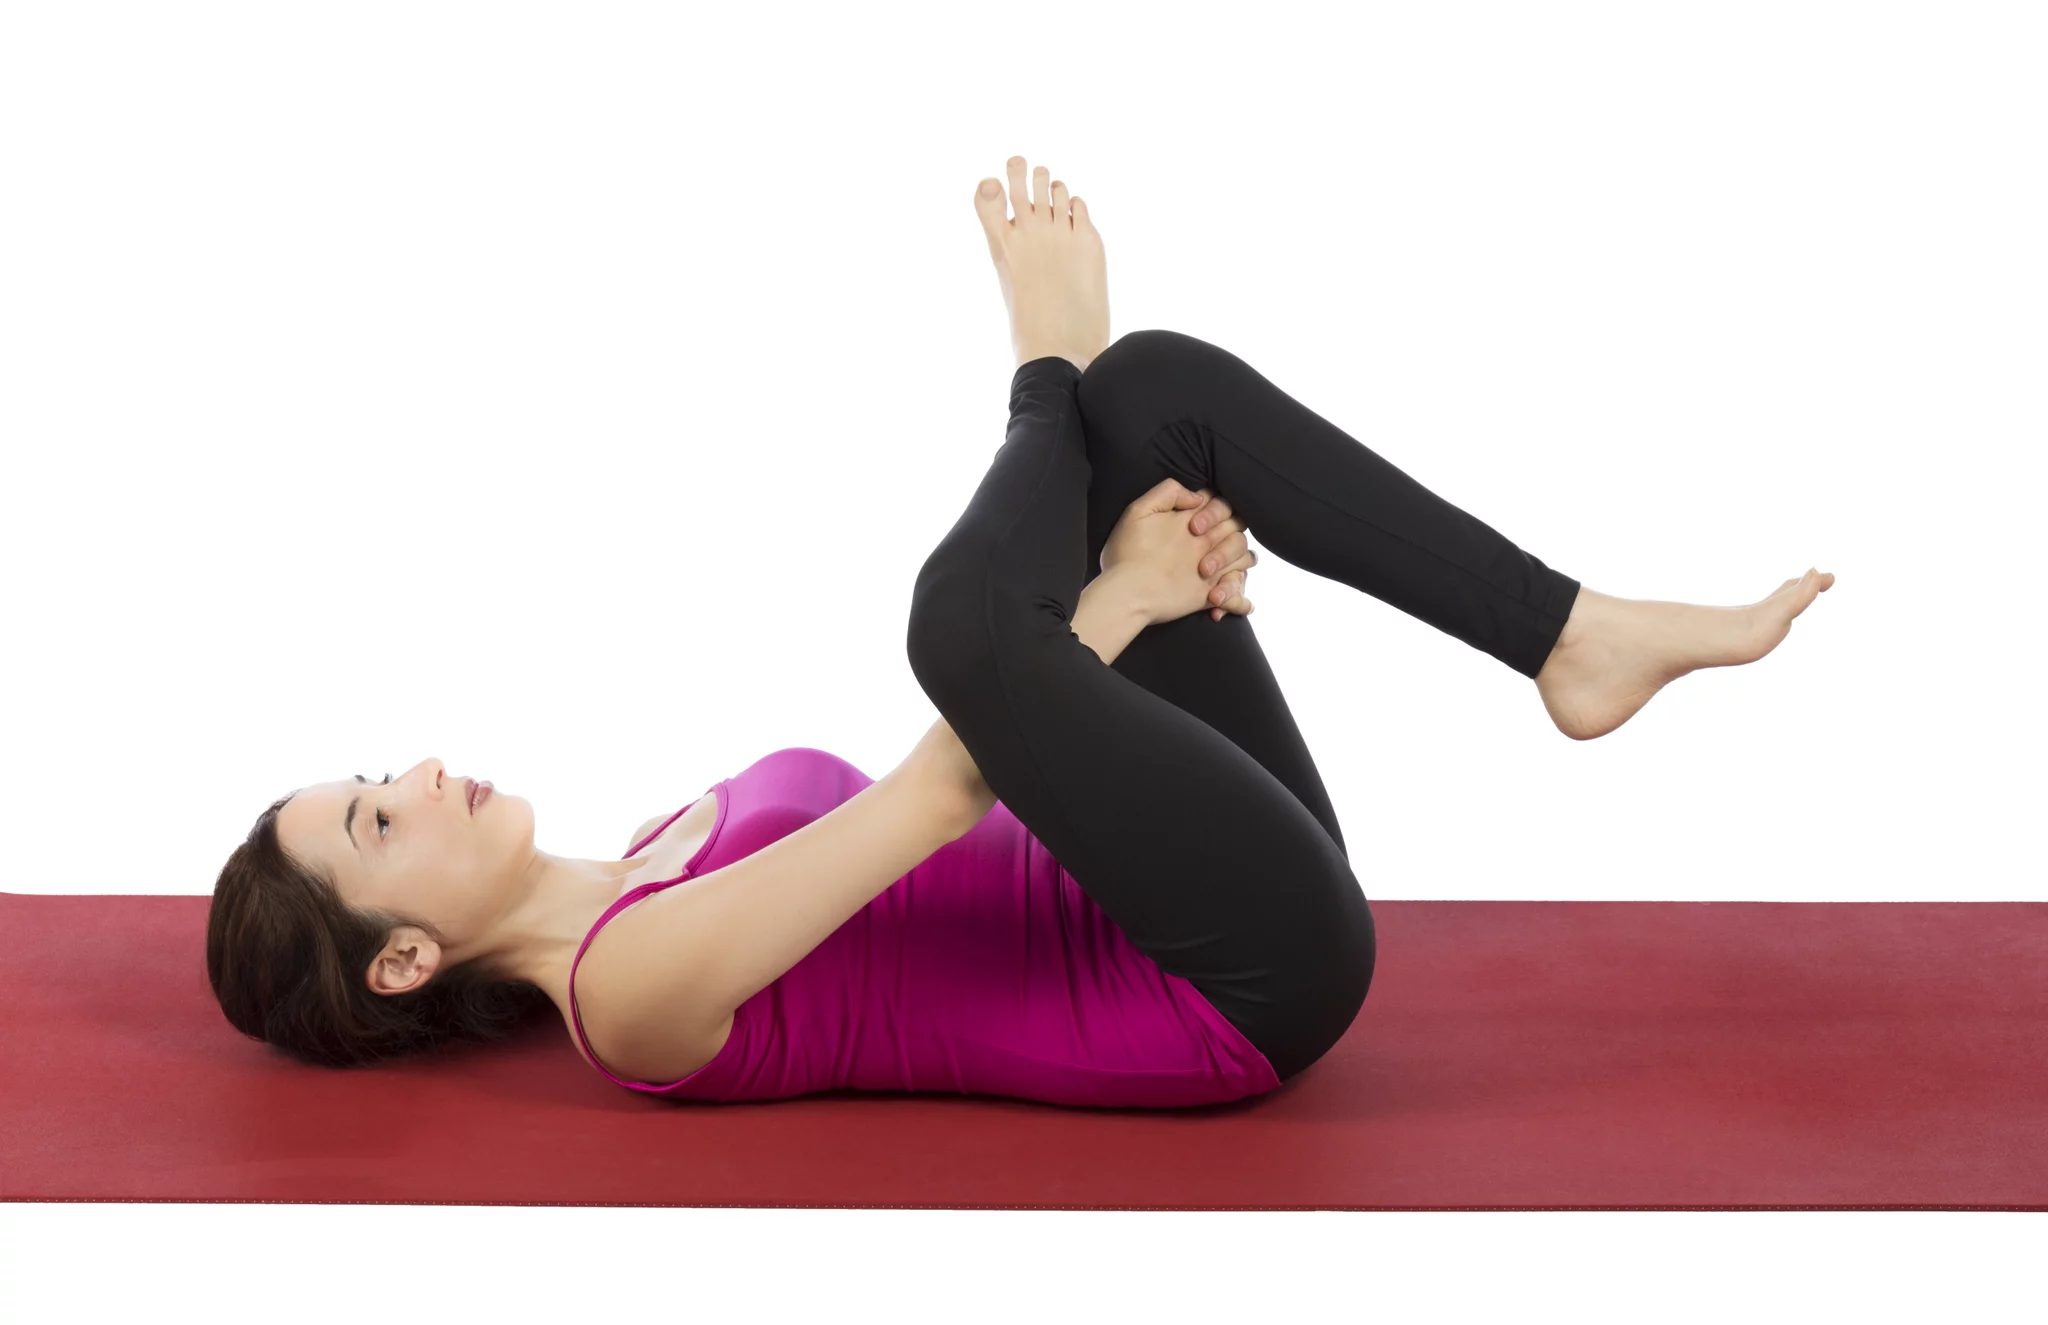 Breaking down 14 of the greatest stretches for sciatica pain relief